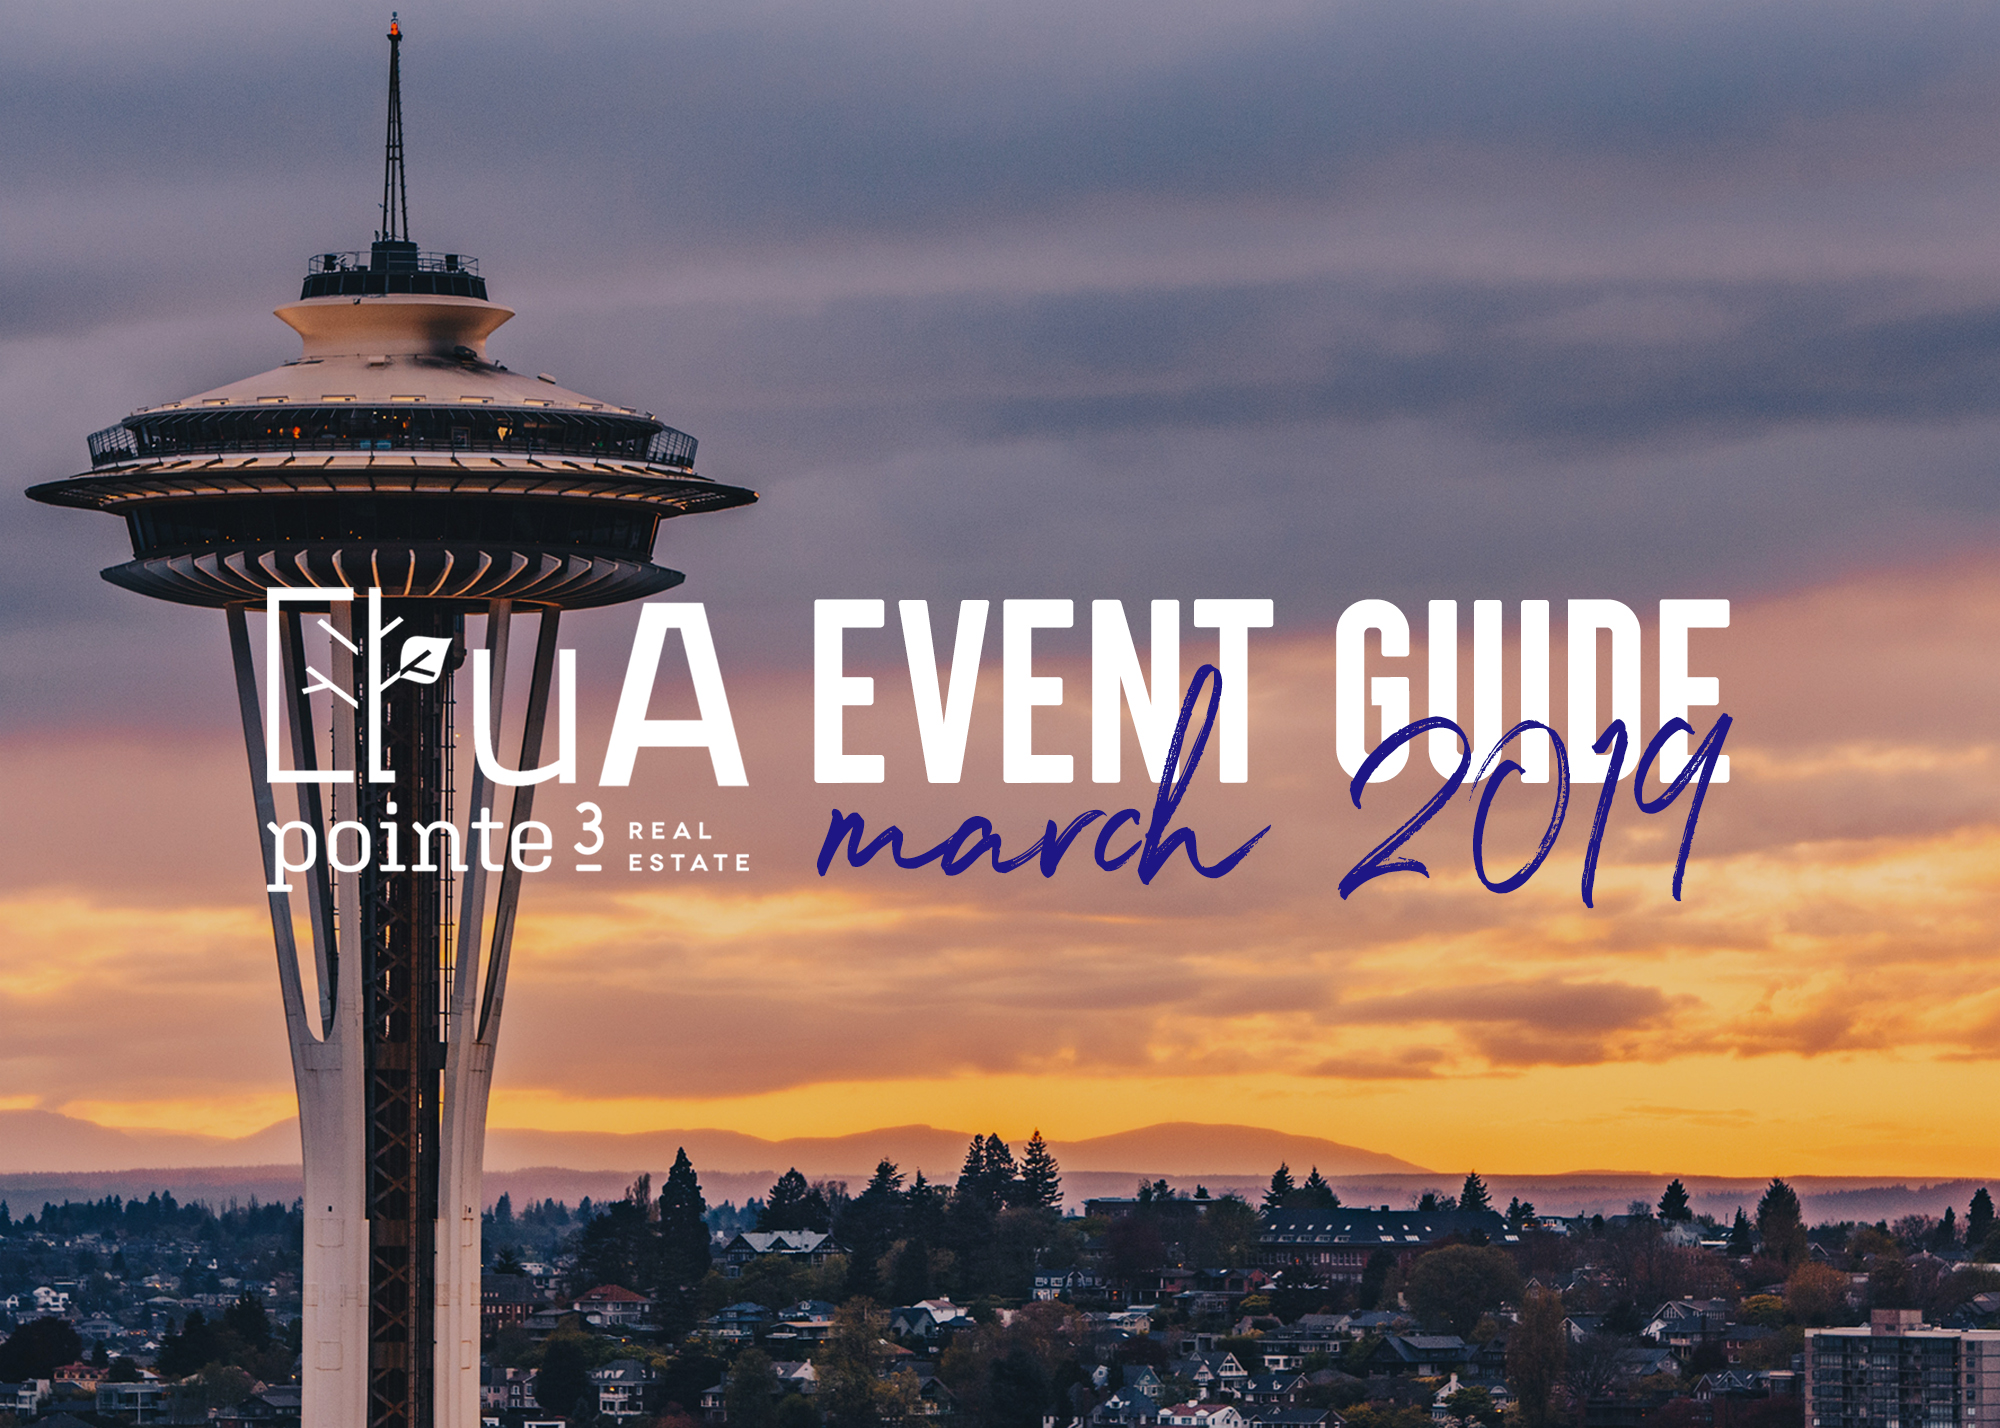 Seattle Event Guide March 2019 UrbanAsh Real Estate